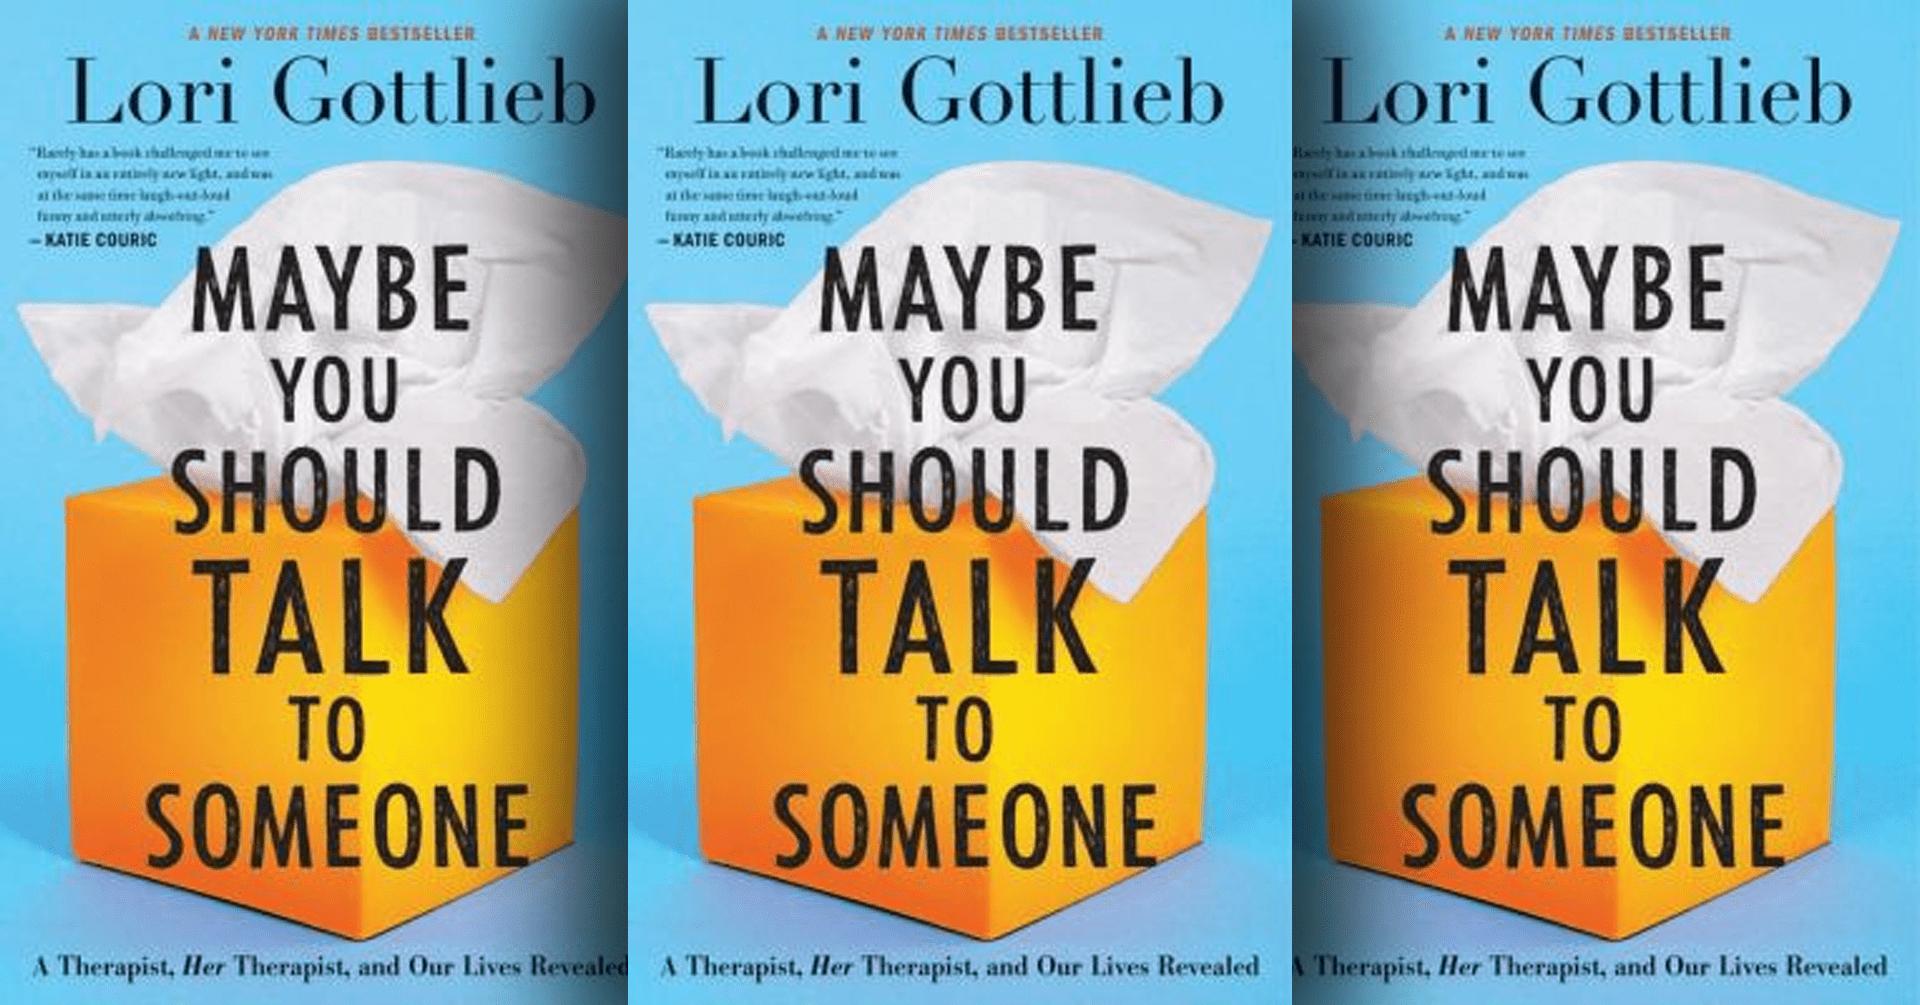 Maybe You Should Talk to Someone by Lori Gottlieb (book cover)